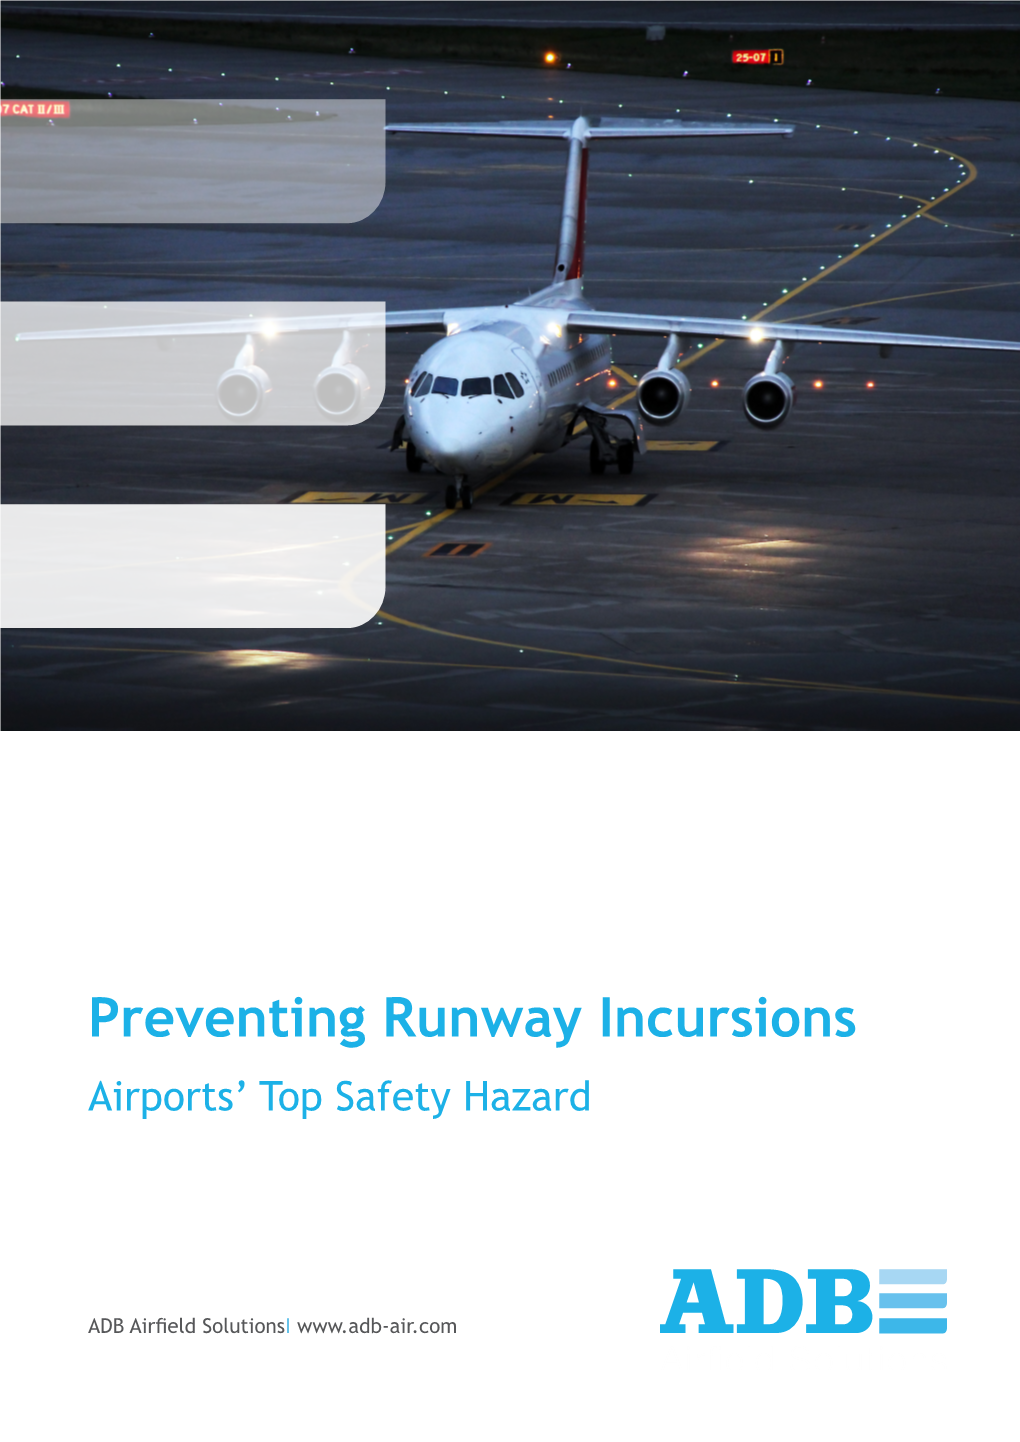 Preventing Runway Incursions Airports’ Top Safety Hazard